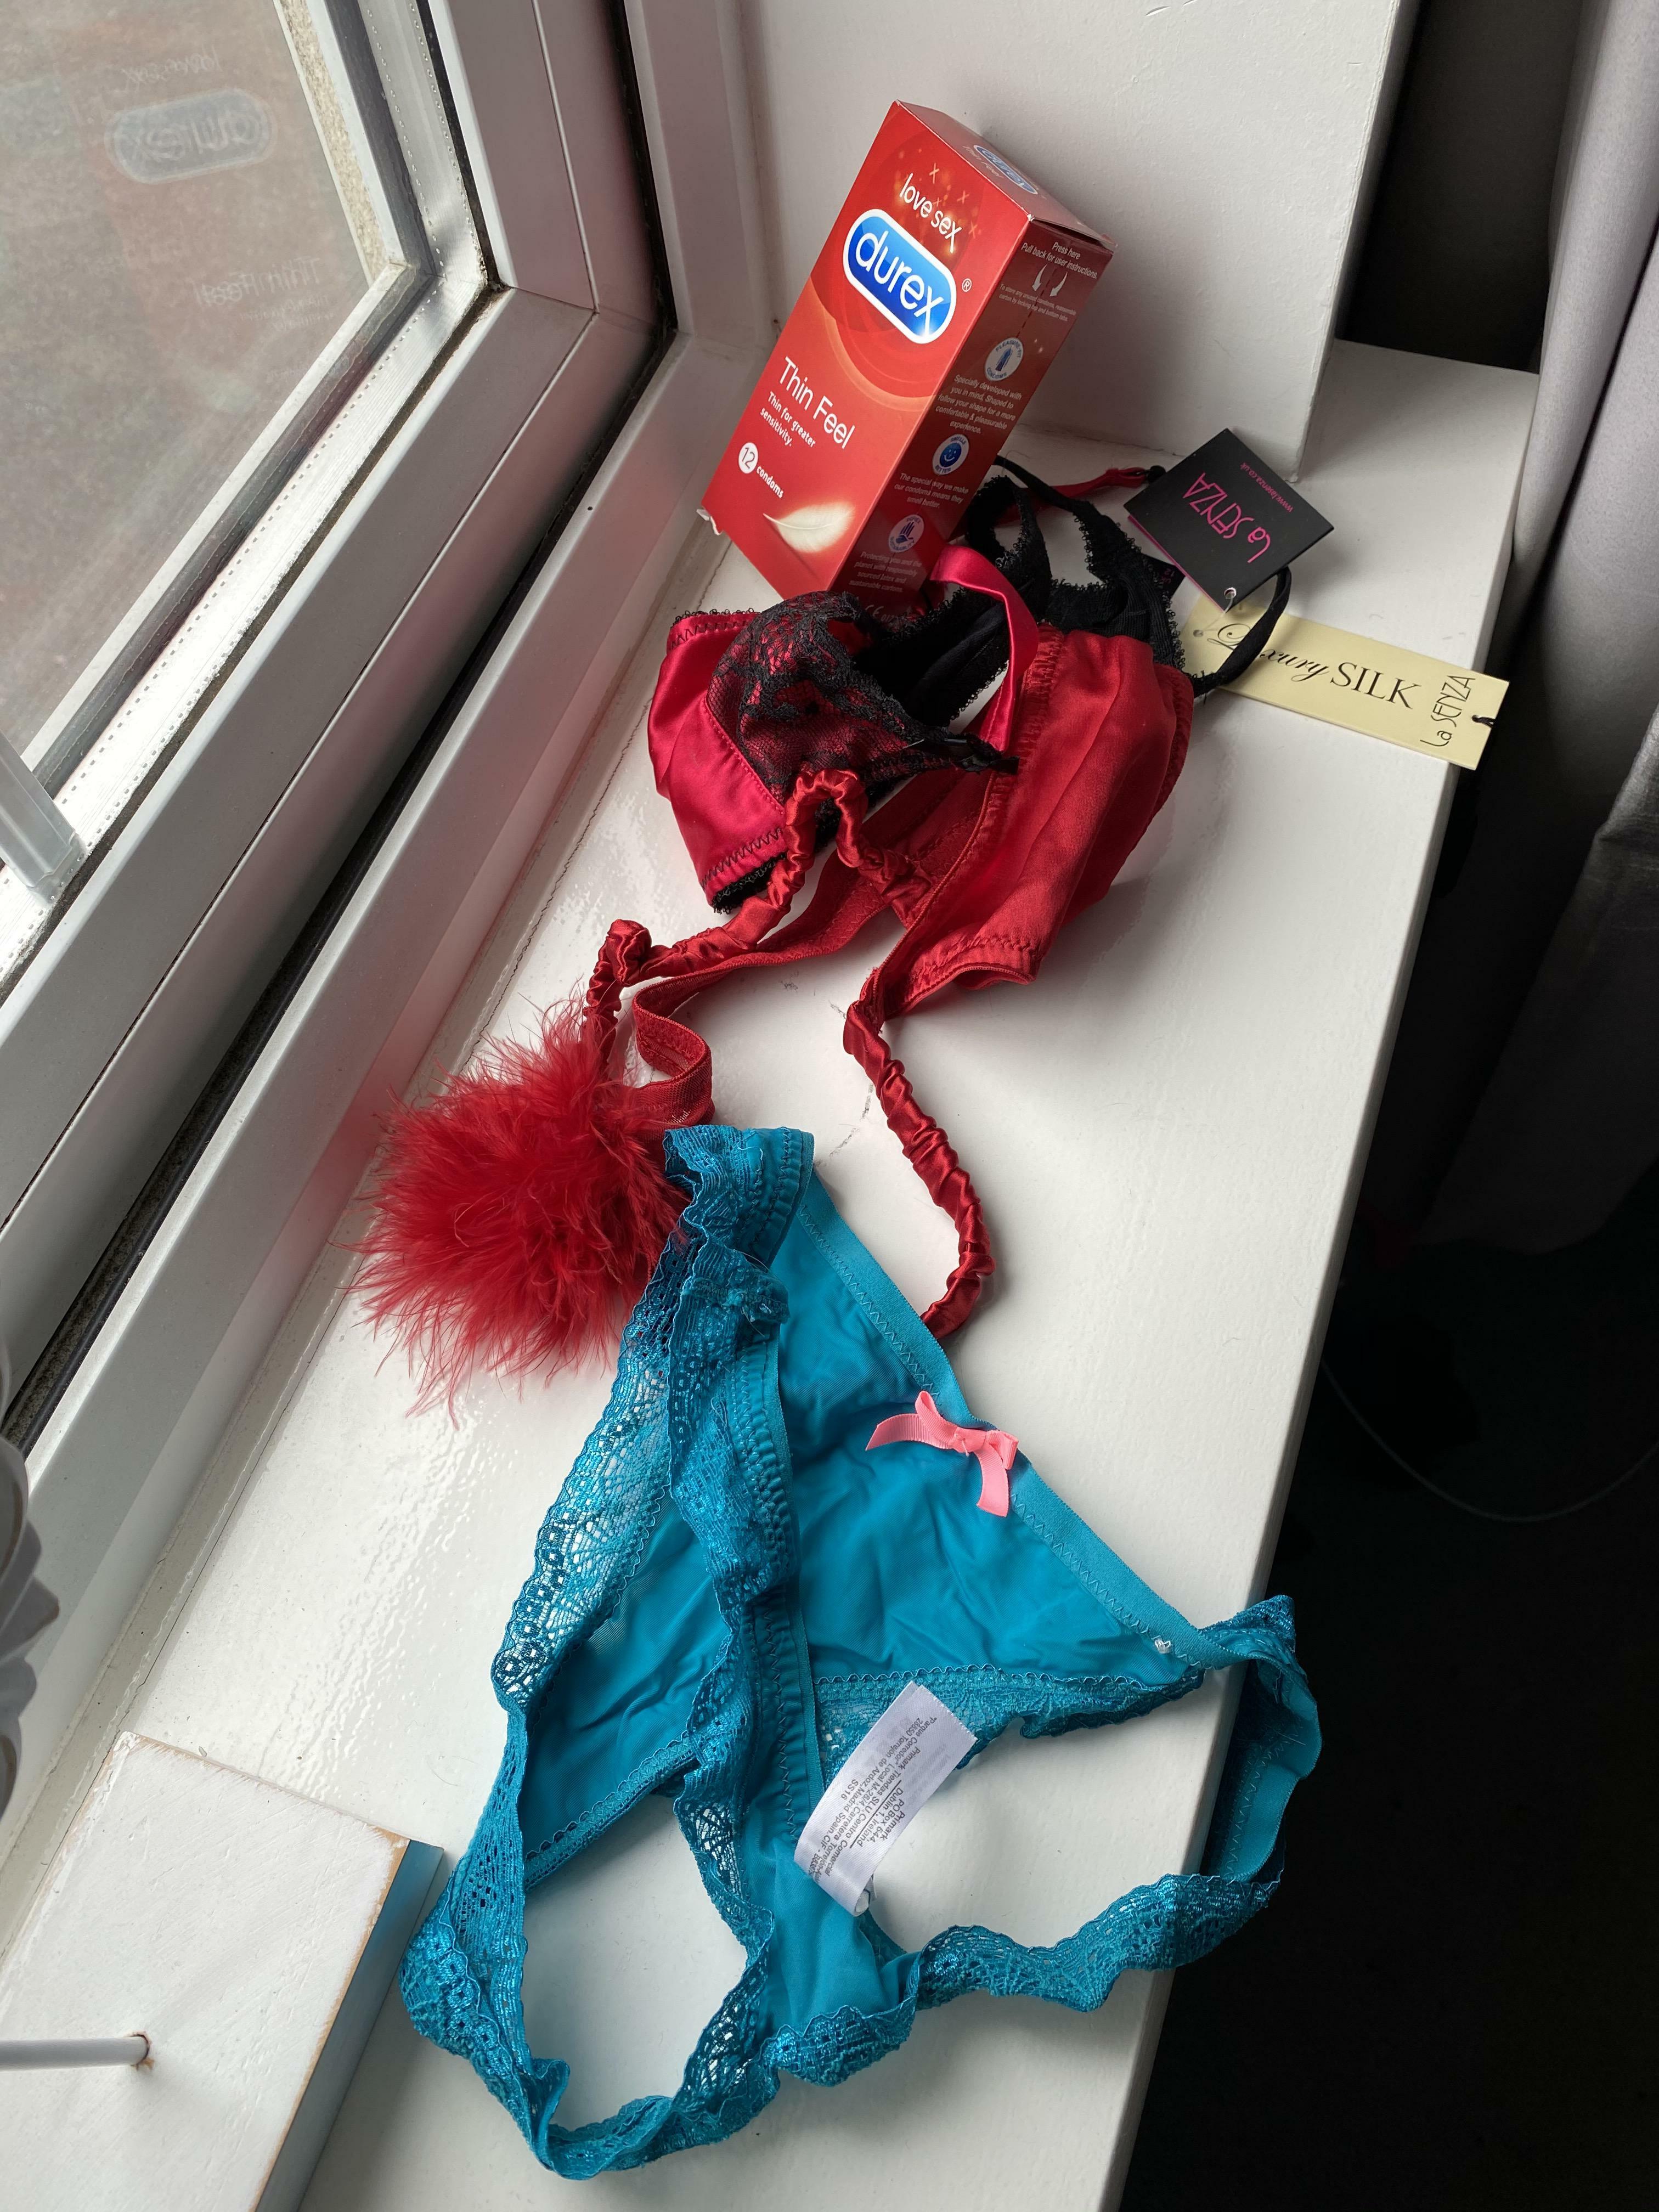 Wife left this out for our new built window cleaner! Hope he takes the bait! UK based Cuckold